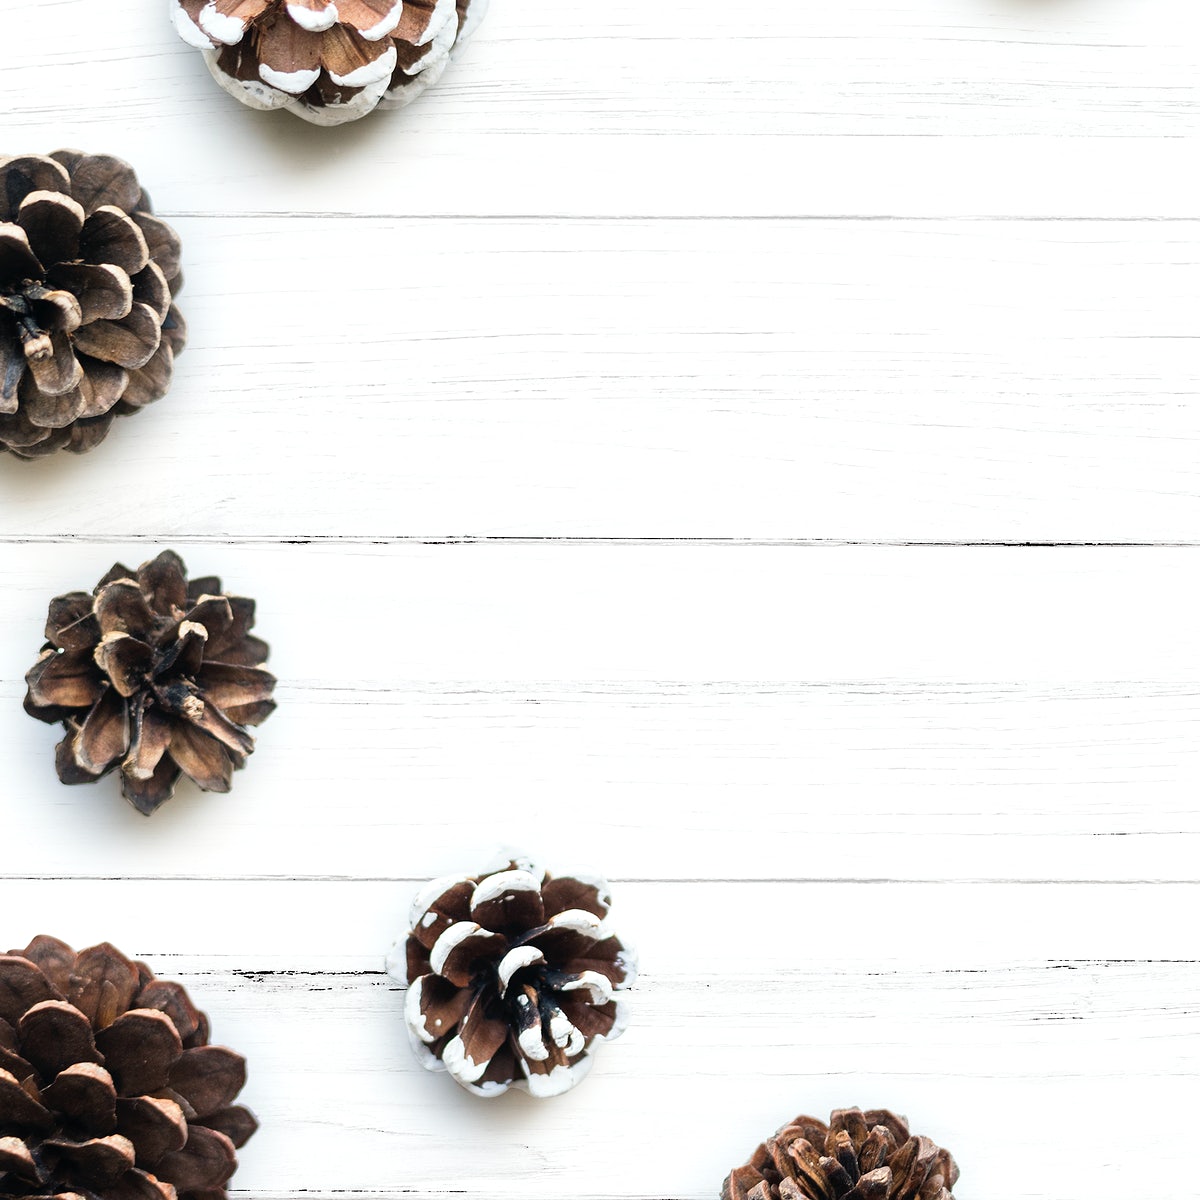 Free Blank Space With Pine Cones Mockup